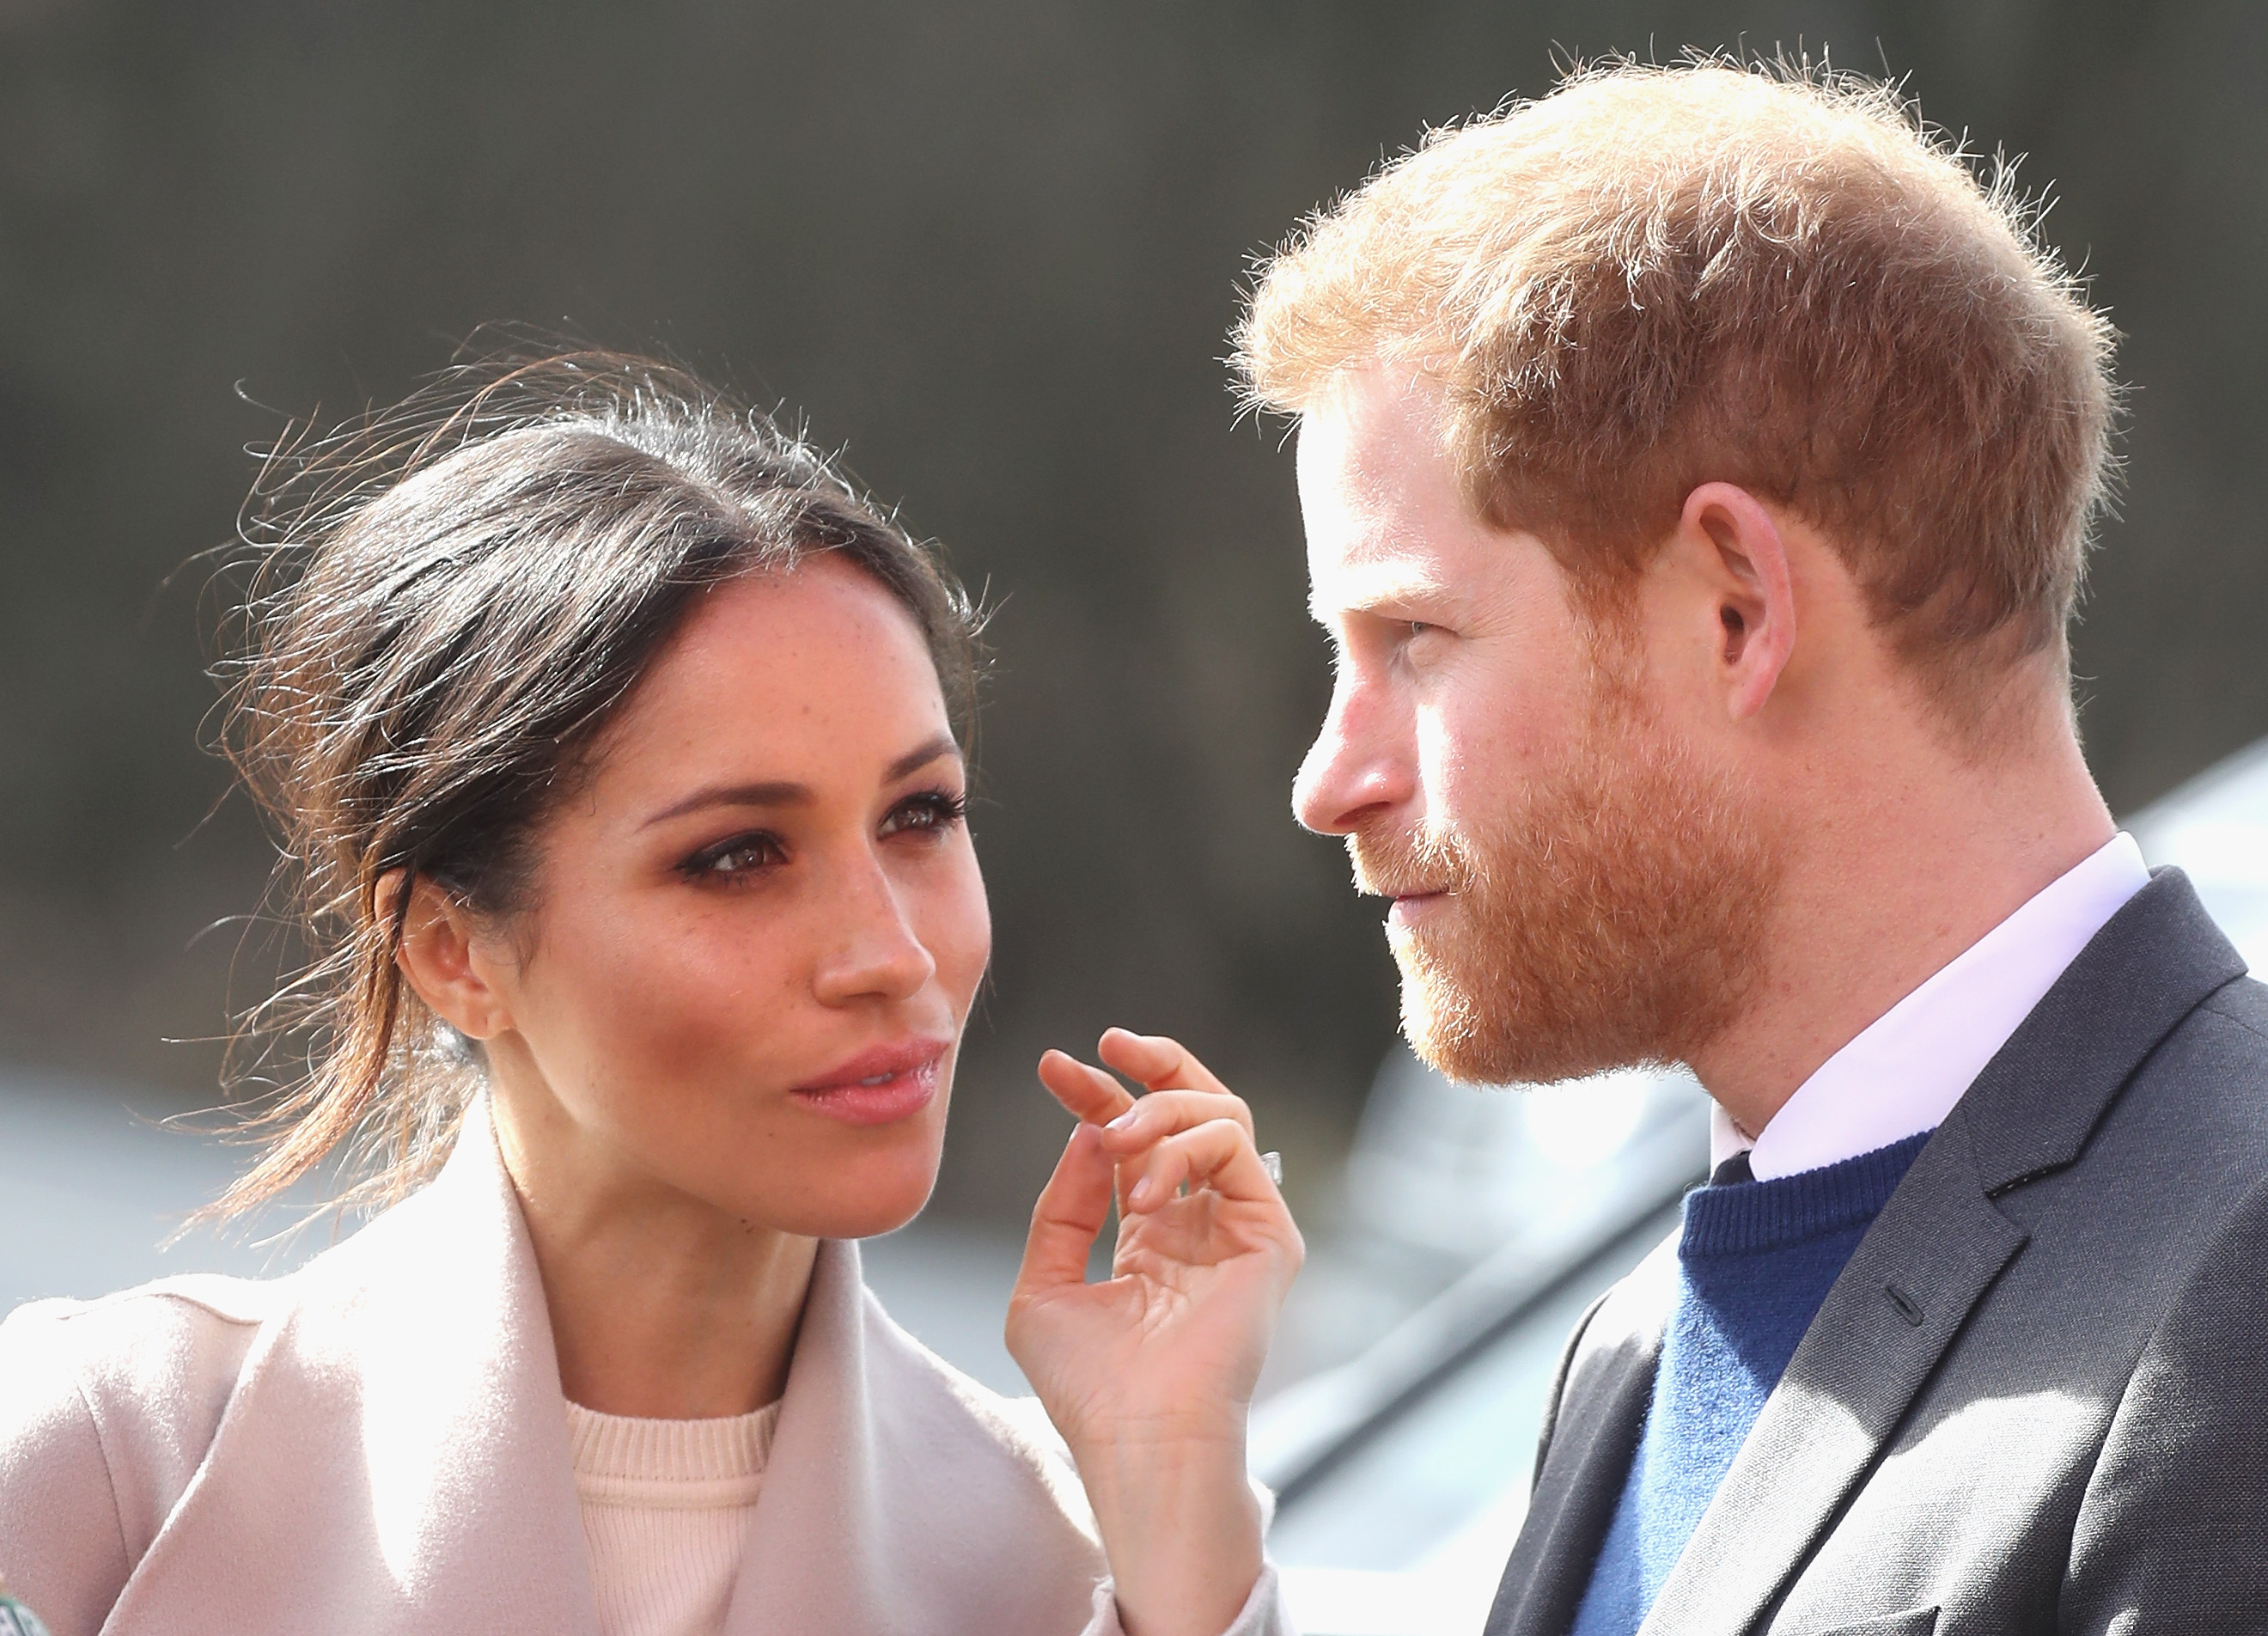 Meghan Markle and Prince Harry photographed on an official visit to Eikon Centre